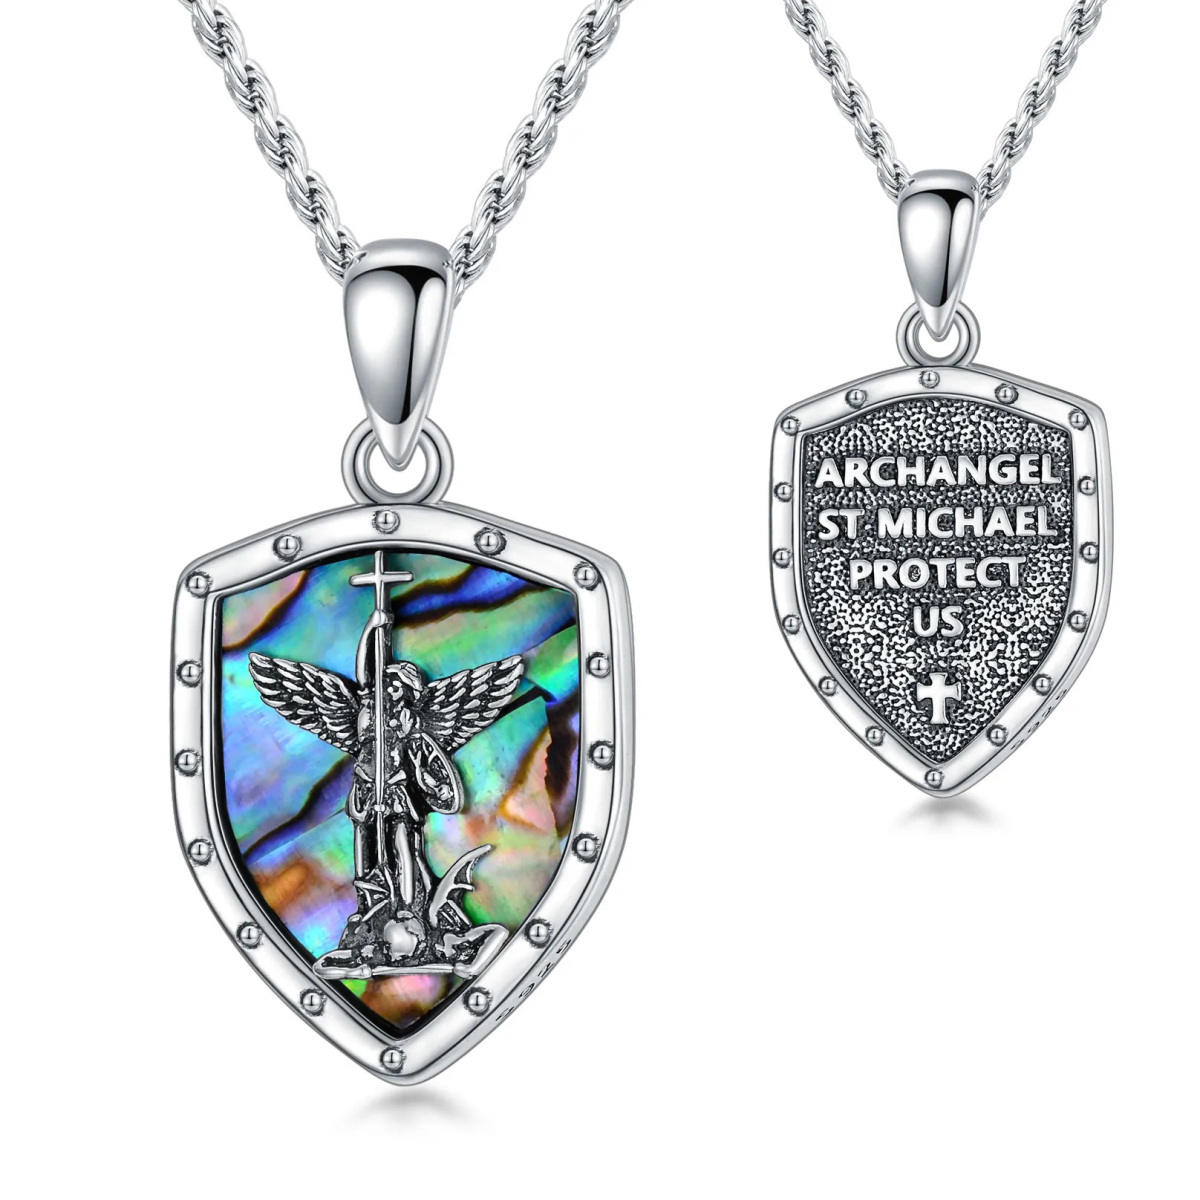 Sterling Silver Abalone Shellfish Saint Michael Shield Pendant Necklace with Engraving Words-1